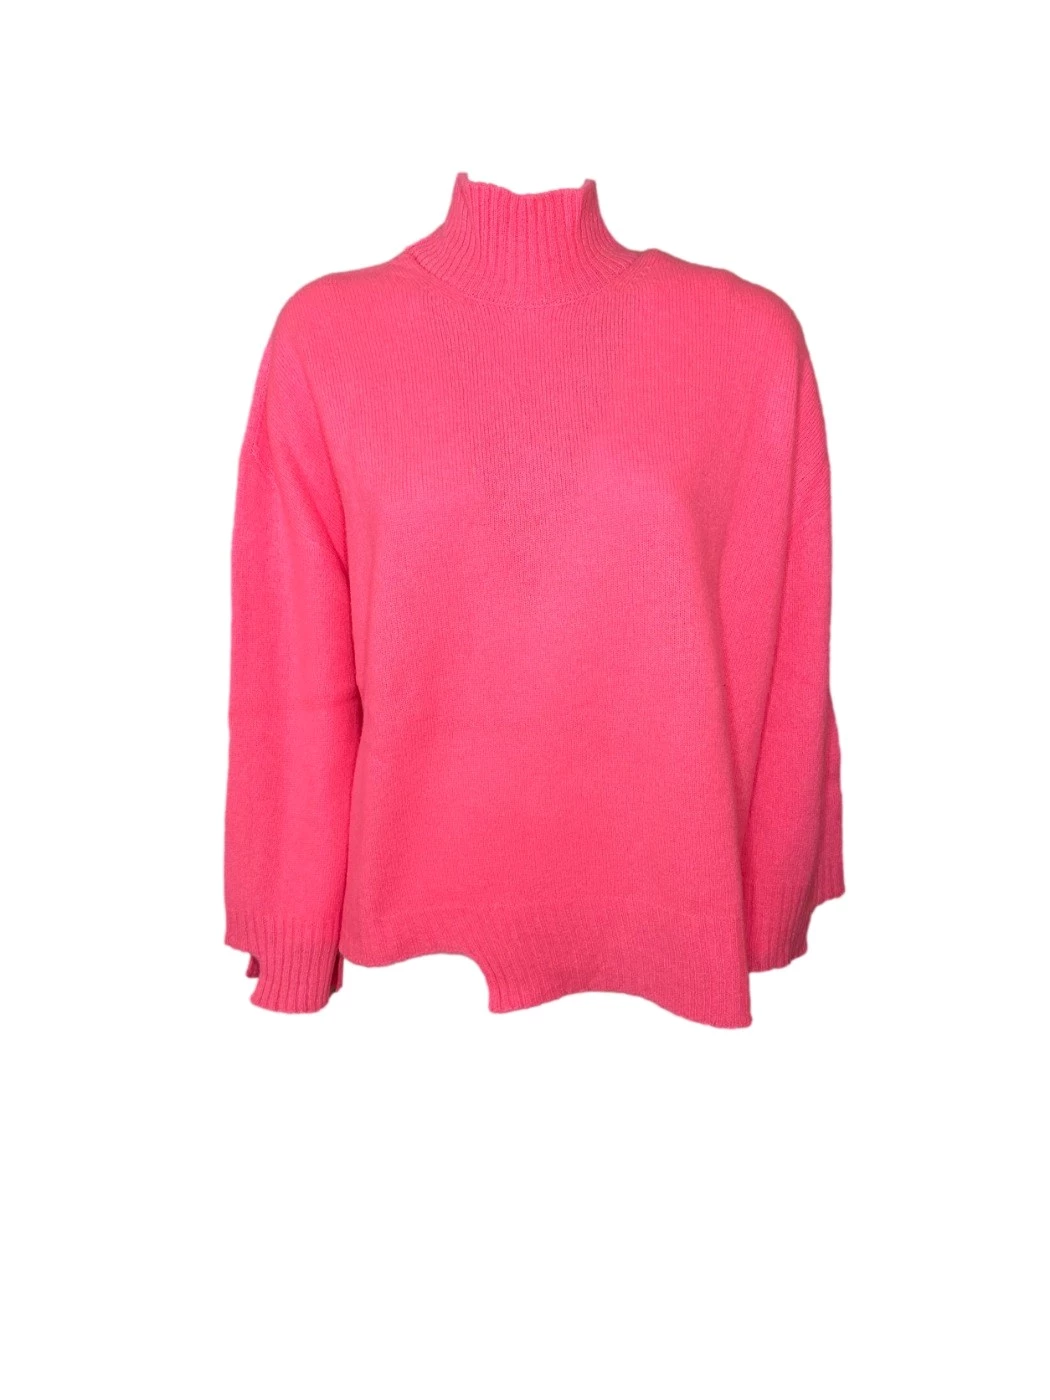 Wool and cashmere sweater SOLOTRE